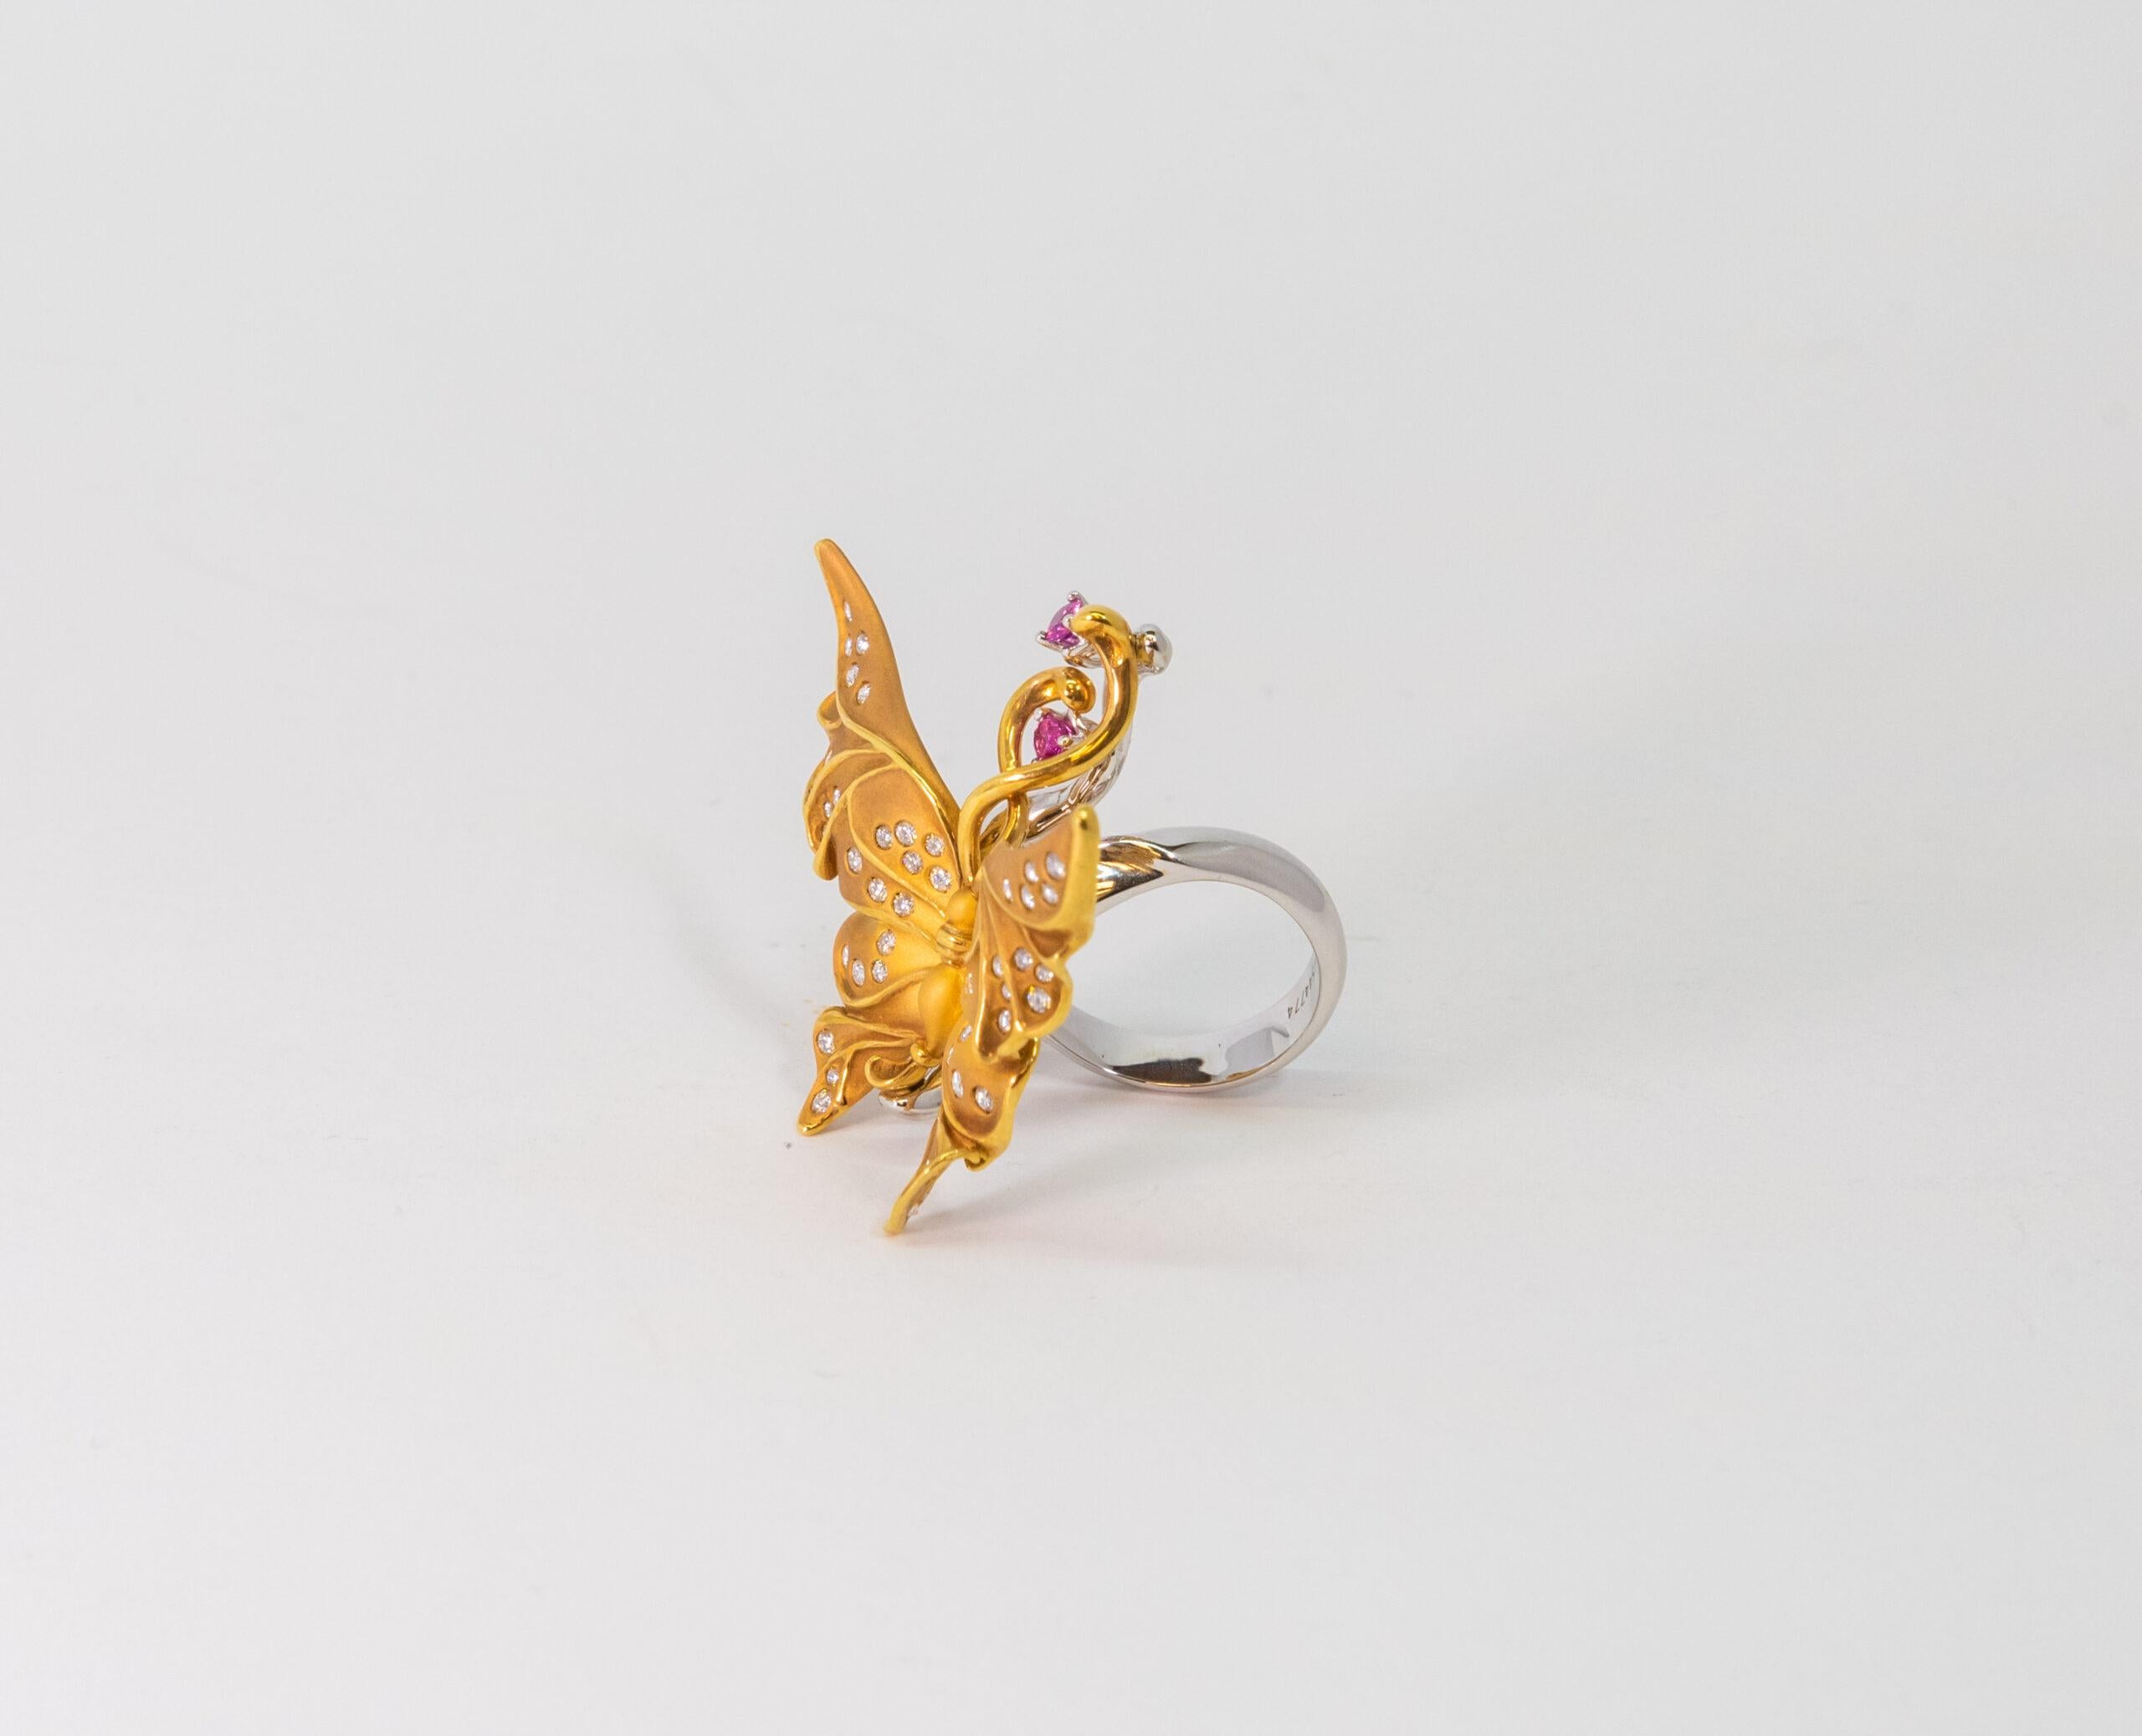 This Butterfly shape ring is made of 18K Yellow Gold and 18K White Gold. The butterfly-shaped front of the ring is decorated with 52 Diamonds (~0.72ct) and 2 Pink Sapphires (~0.22 ct).

Size – 55 (7 US)